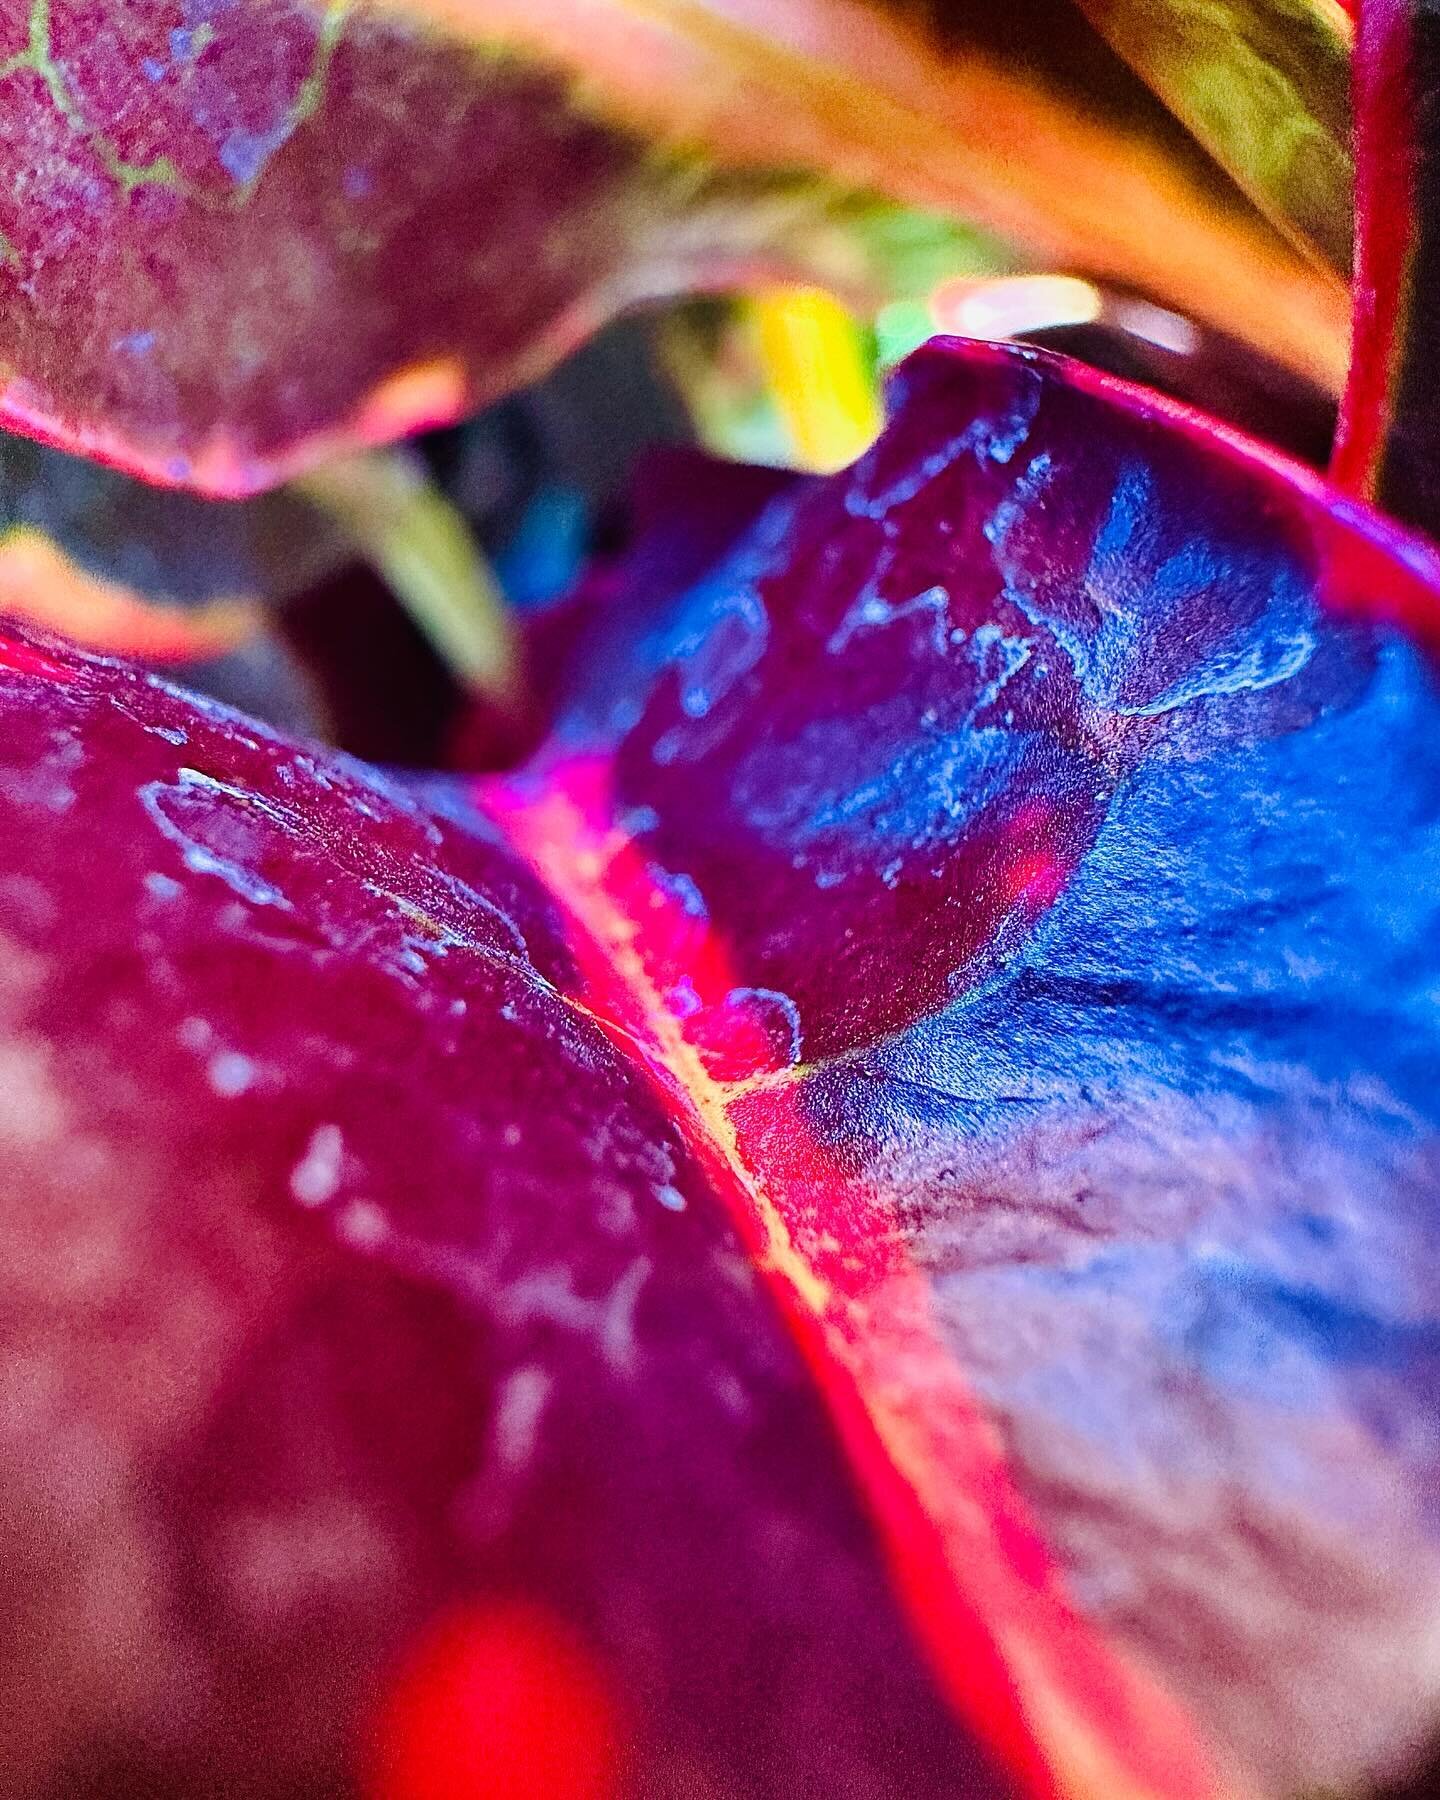 Sometimes, the way the light hits and the shadows add depth and a plant is full of its own power, you get a rainbow. It&rsquo;s quite incredible and not the sort of bold colors you expect from a leaf. But oh boy if it doesn&rsquo;t just make my heart